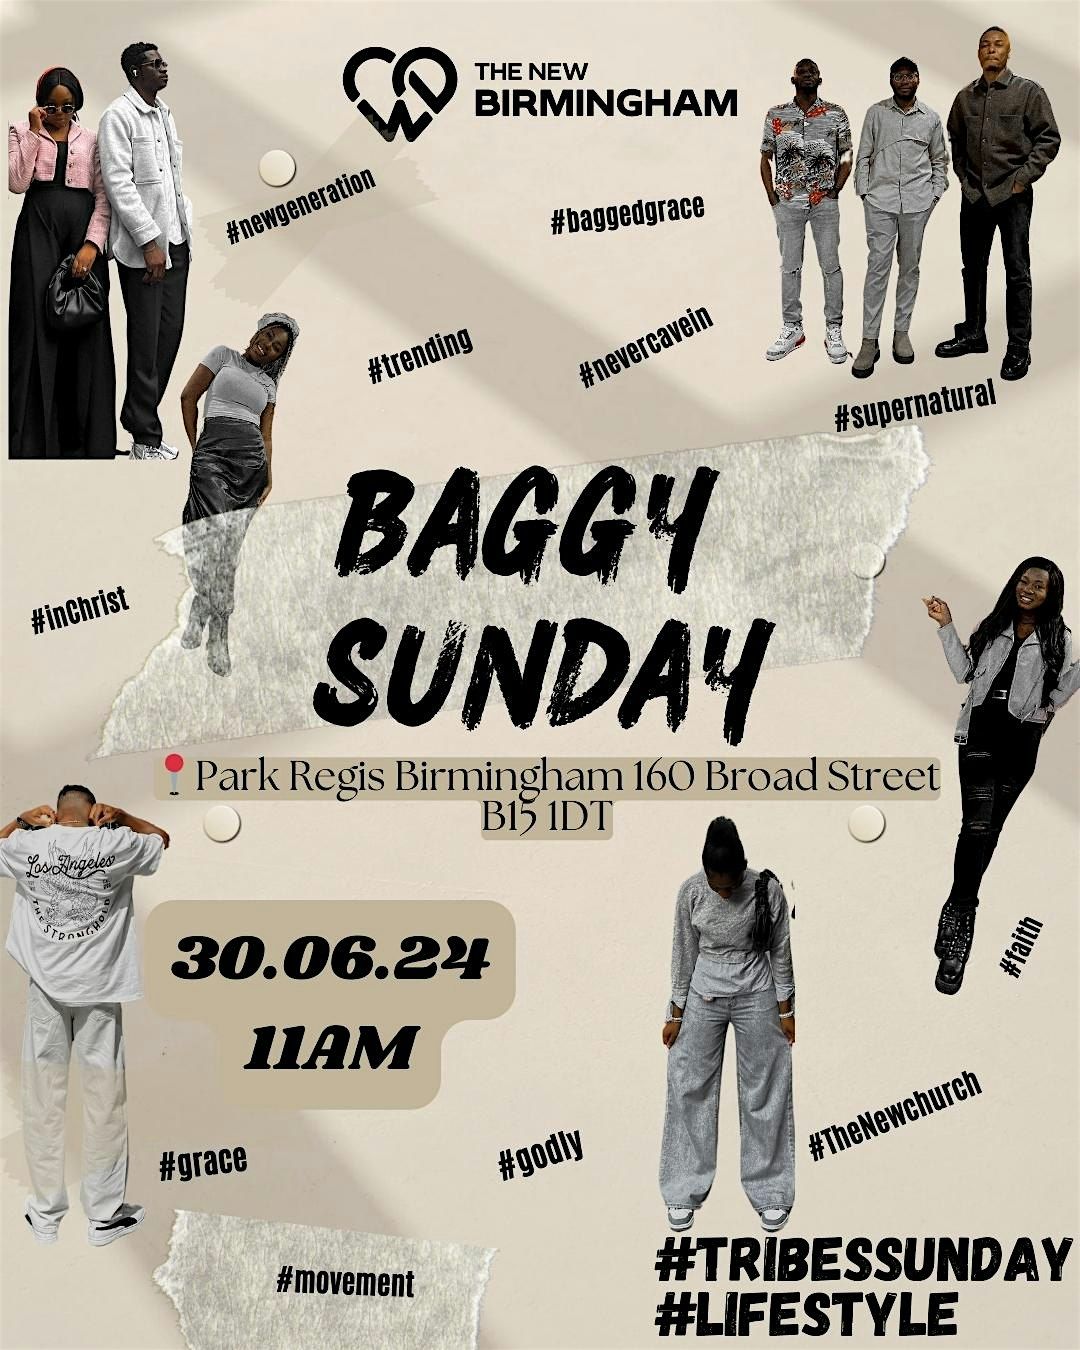 Tribes Sunday - Lifestyle - Baggy